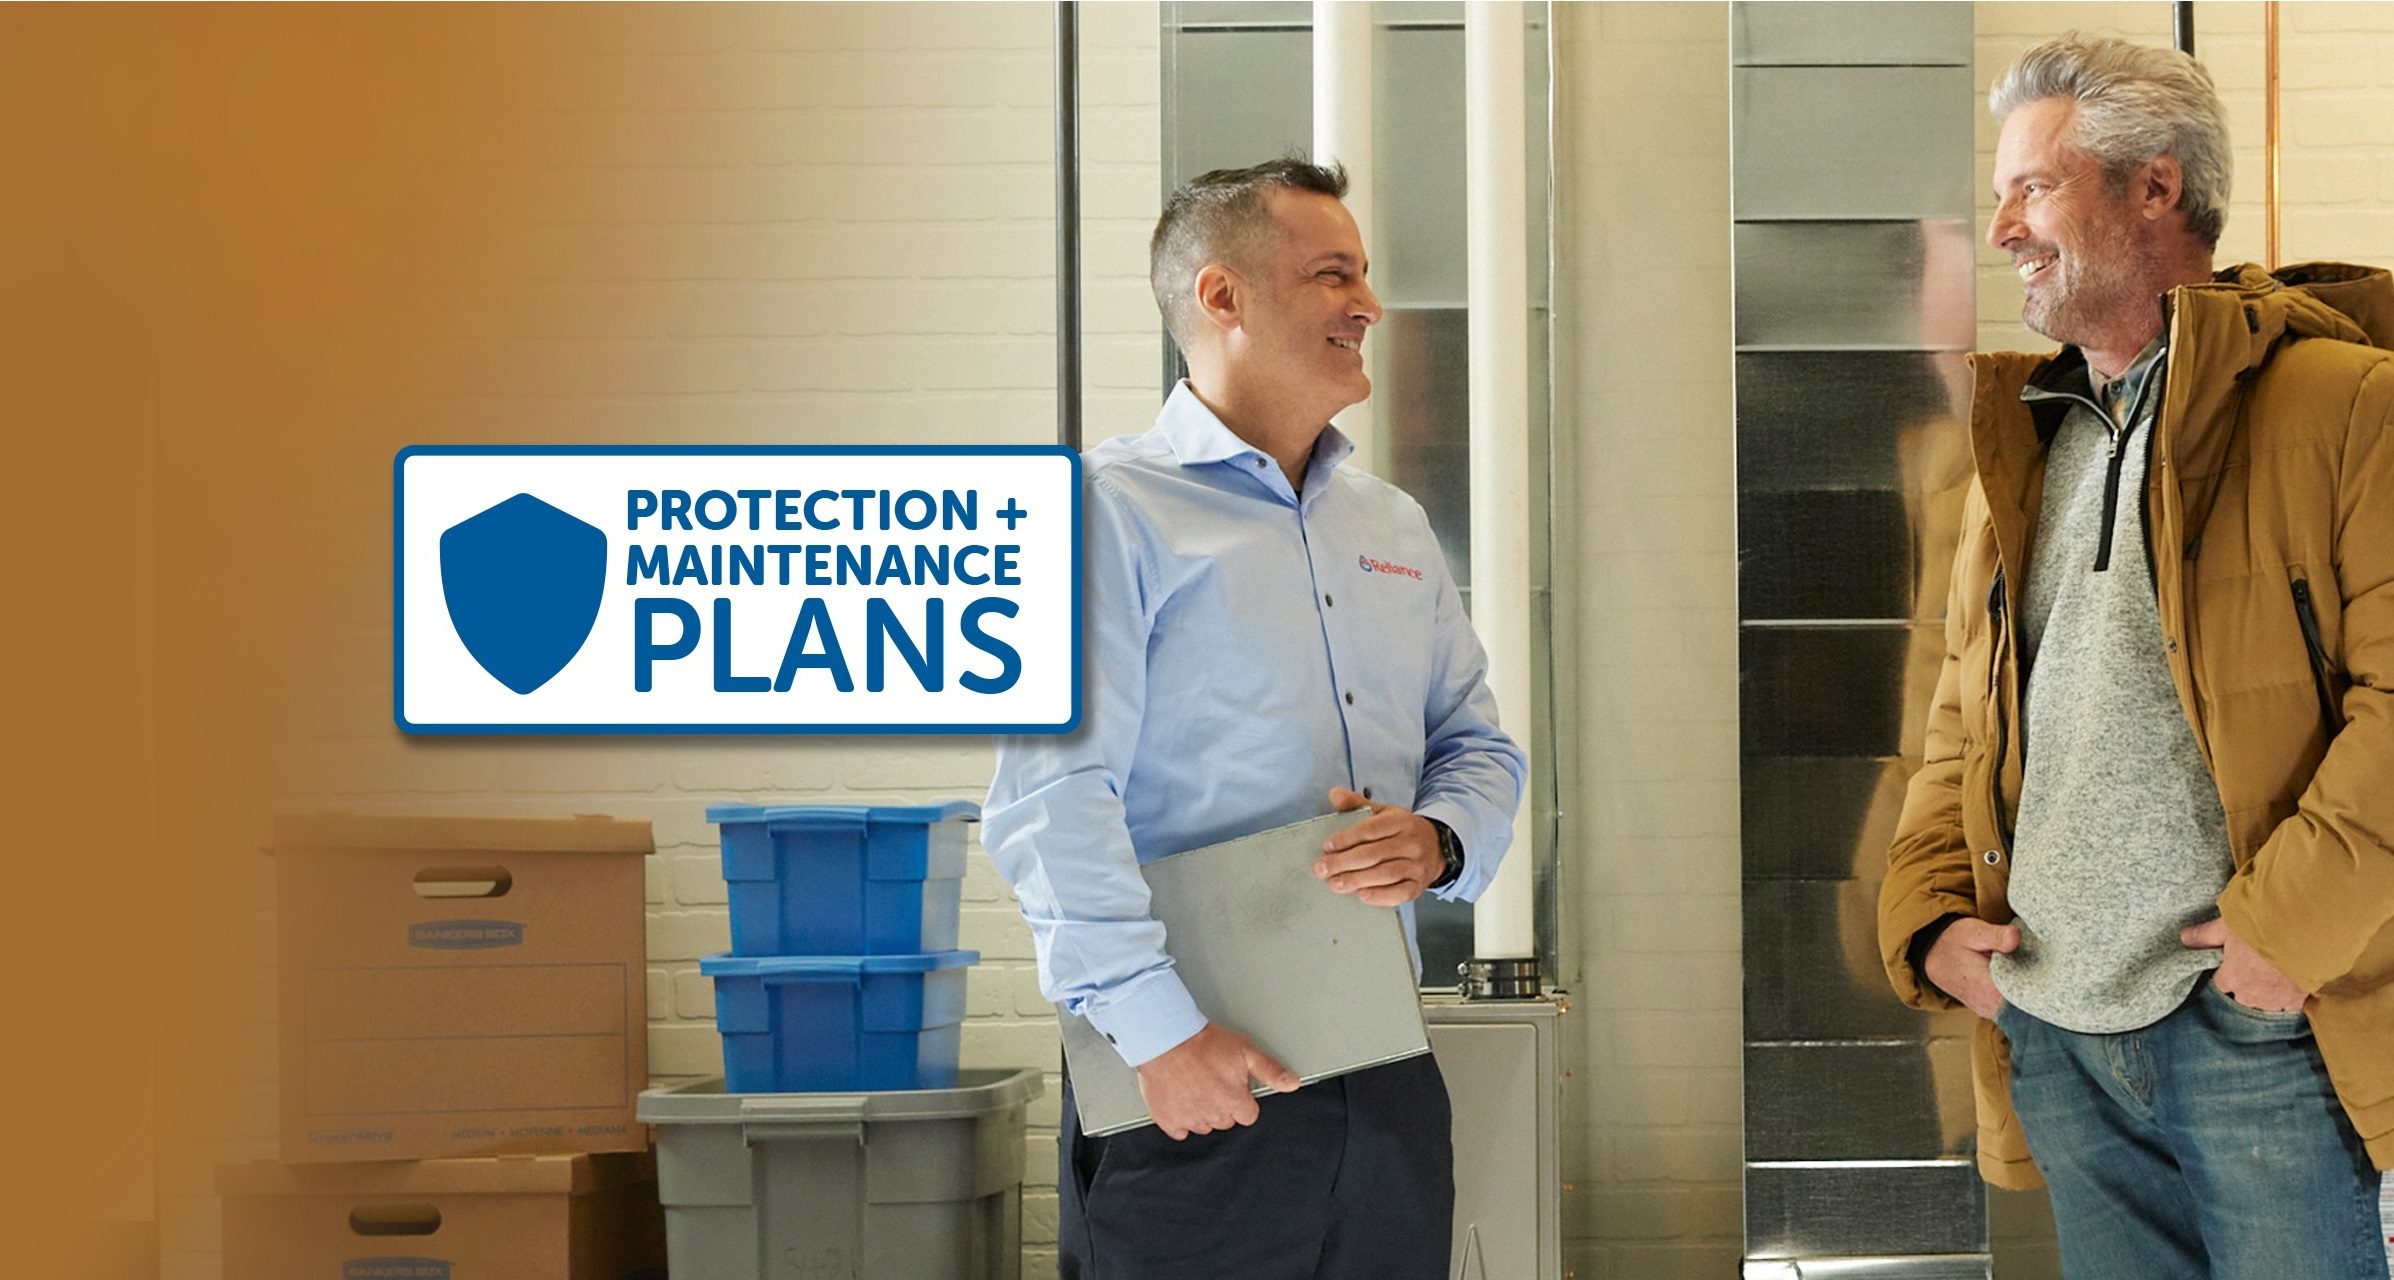 Protection + Maintenance Plans with reliance home comfort advisor and homeowner